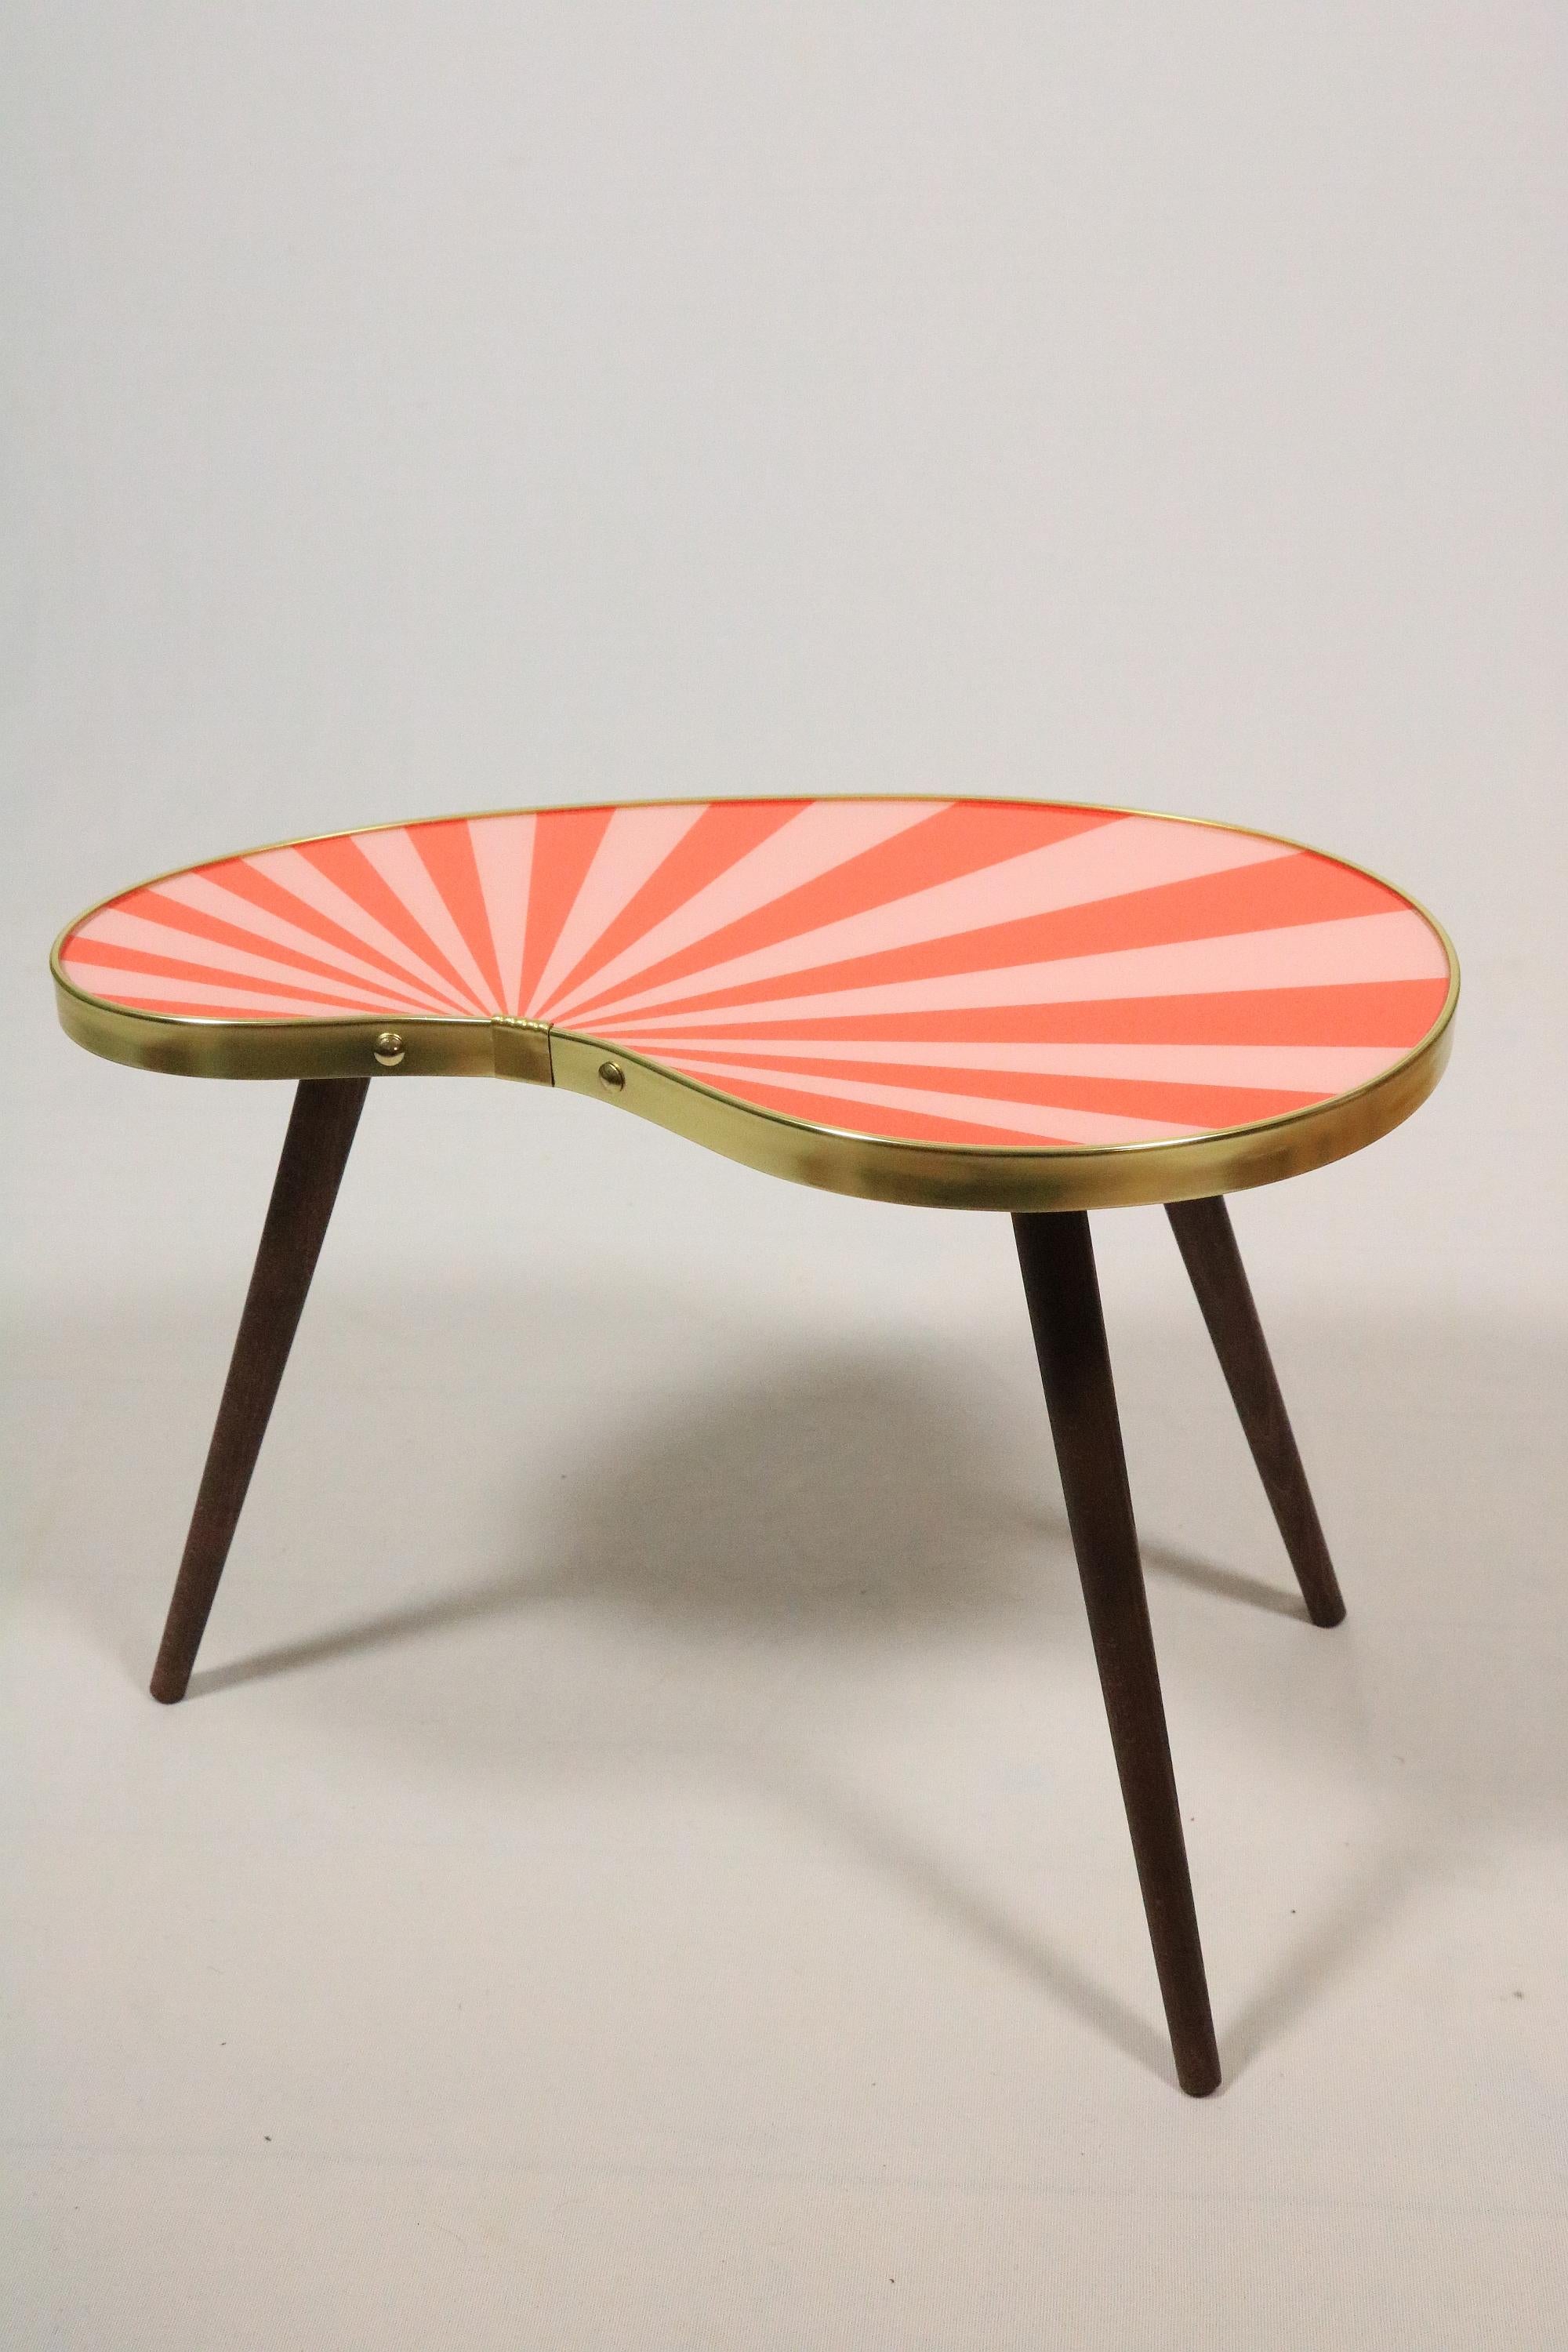 Exclusive offer of one small kidney shaped side table. 
Red-Pink Stripes (see other offers: 4 different colours and patterns avaiable).
Colour nunaces may be slightly different in reality.

These tables are a high-quality new production after